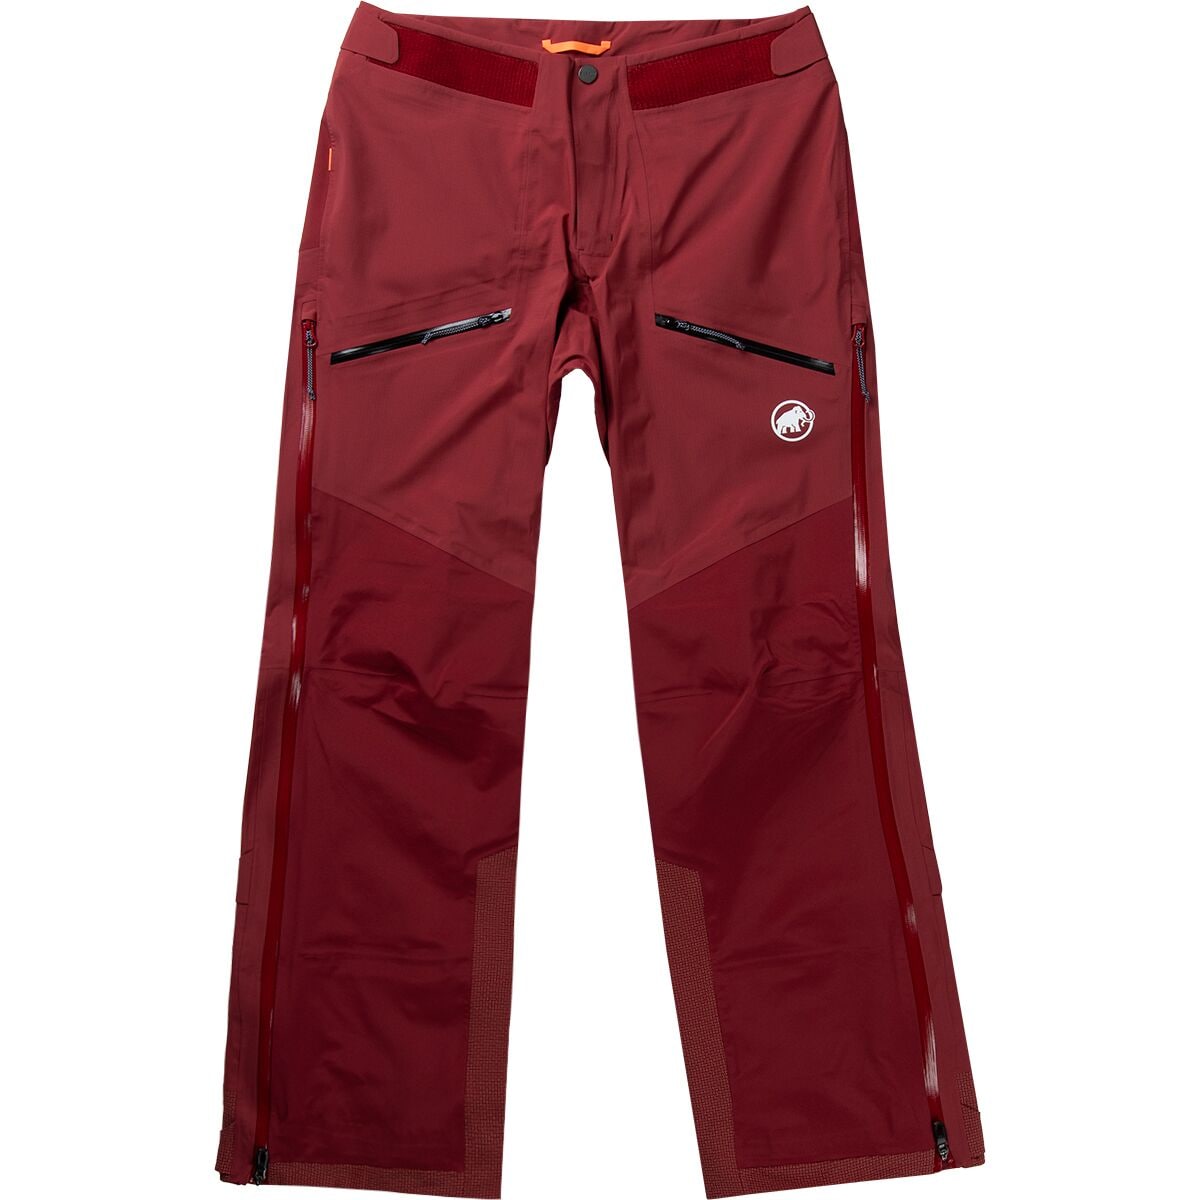 OUTDOOR SPECIAL Mammut HIKING - Pants - Men's - storm - Private Sport Shop